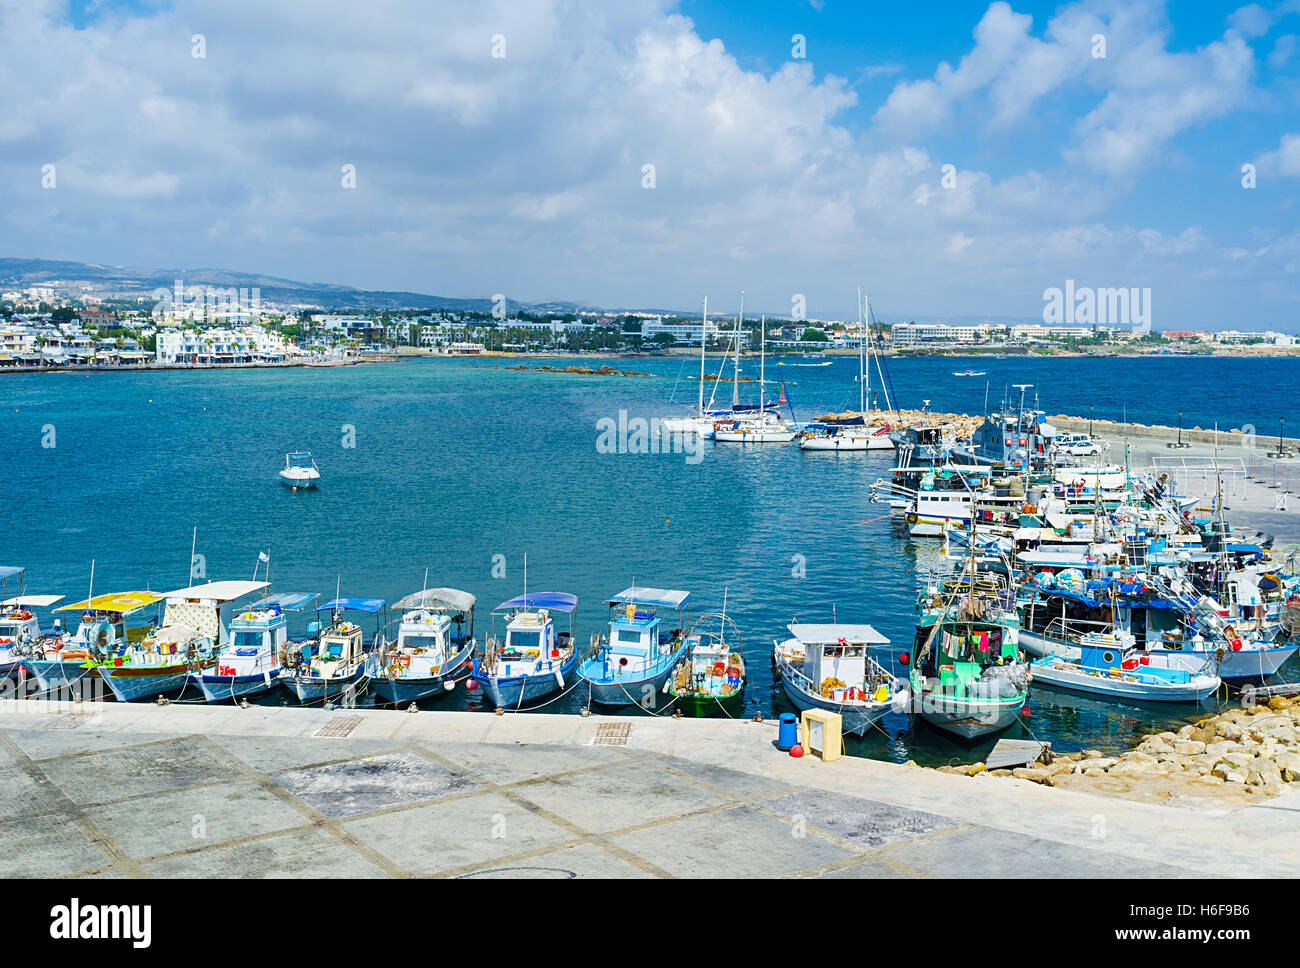 The best way to feel the atmosphere of the large coastal city is to walk among the fishing boats, moored in port, Pafos, Cyprus. Stock Photo